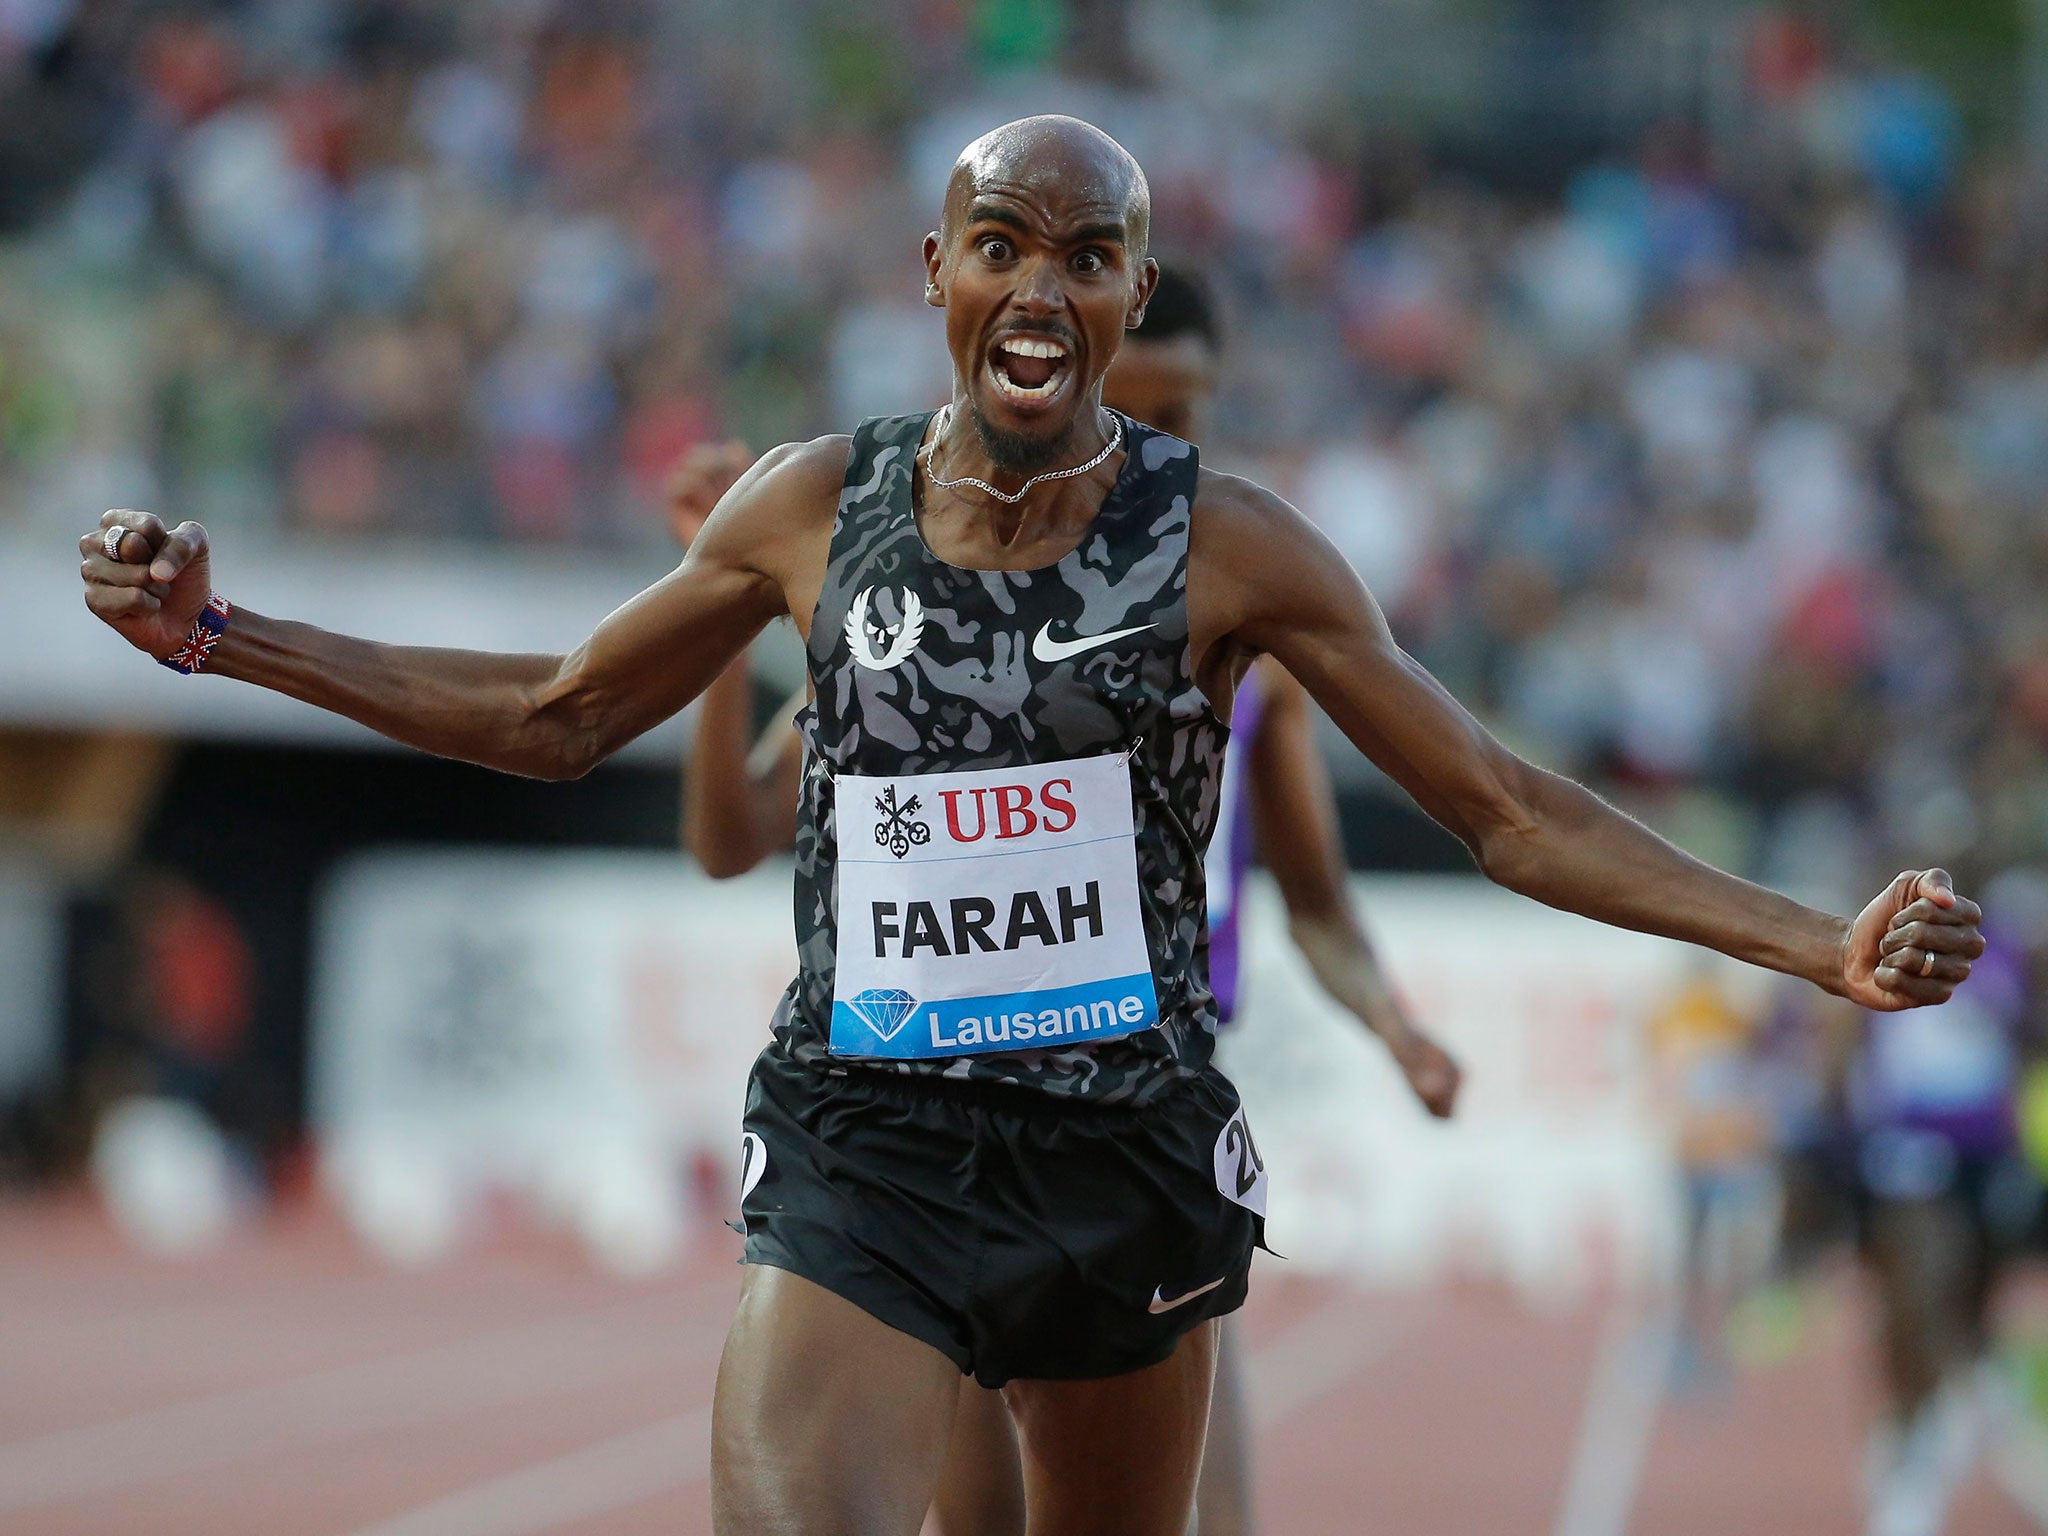 Mo Farah takes victory in the 5,000m at Lausanne's Diamond League meeting